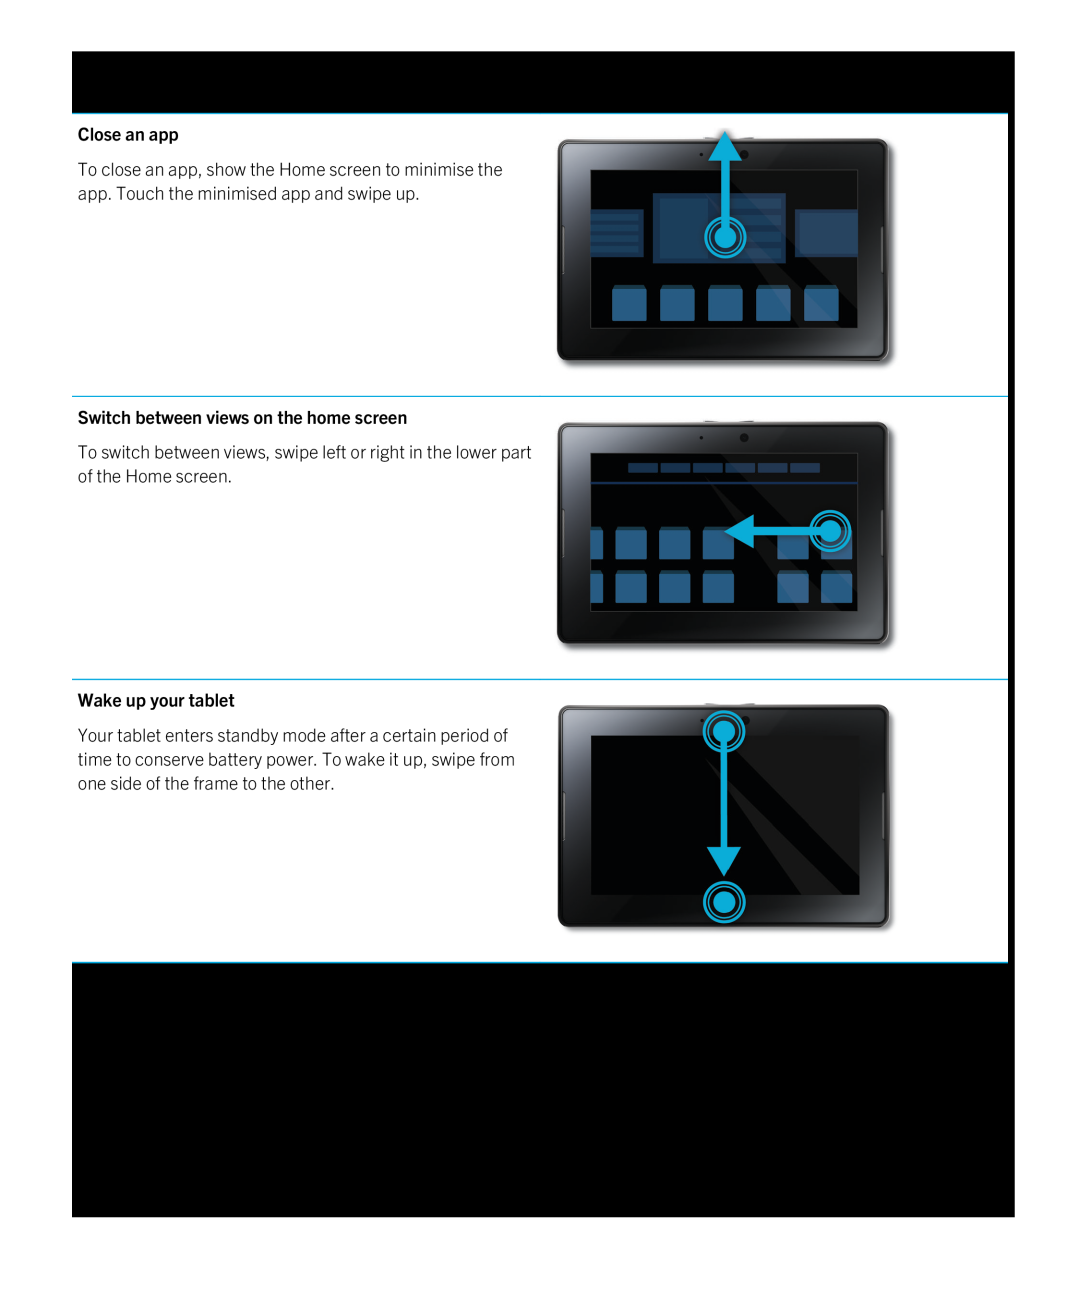 Blackberry 2.0.1 manual Close an app, Switch between views on the home screen, Wake up your tablet 